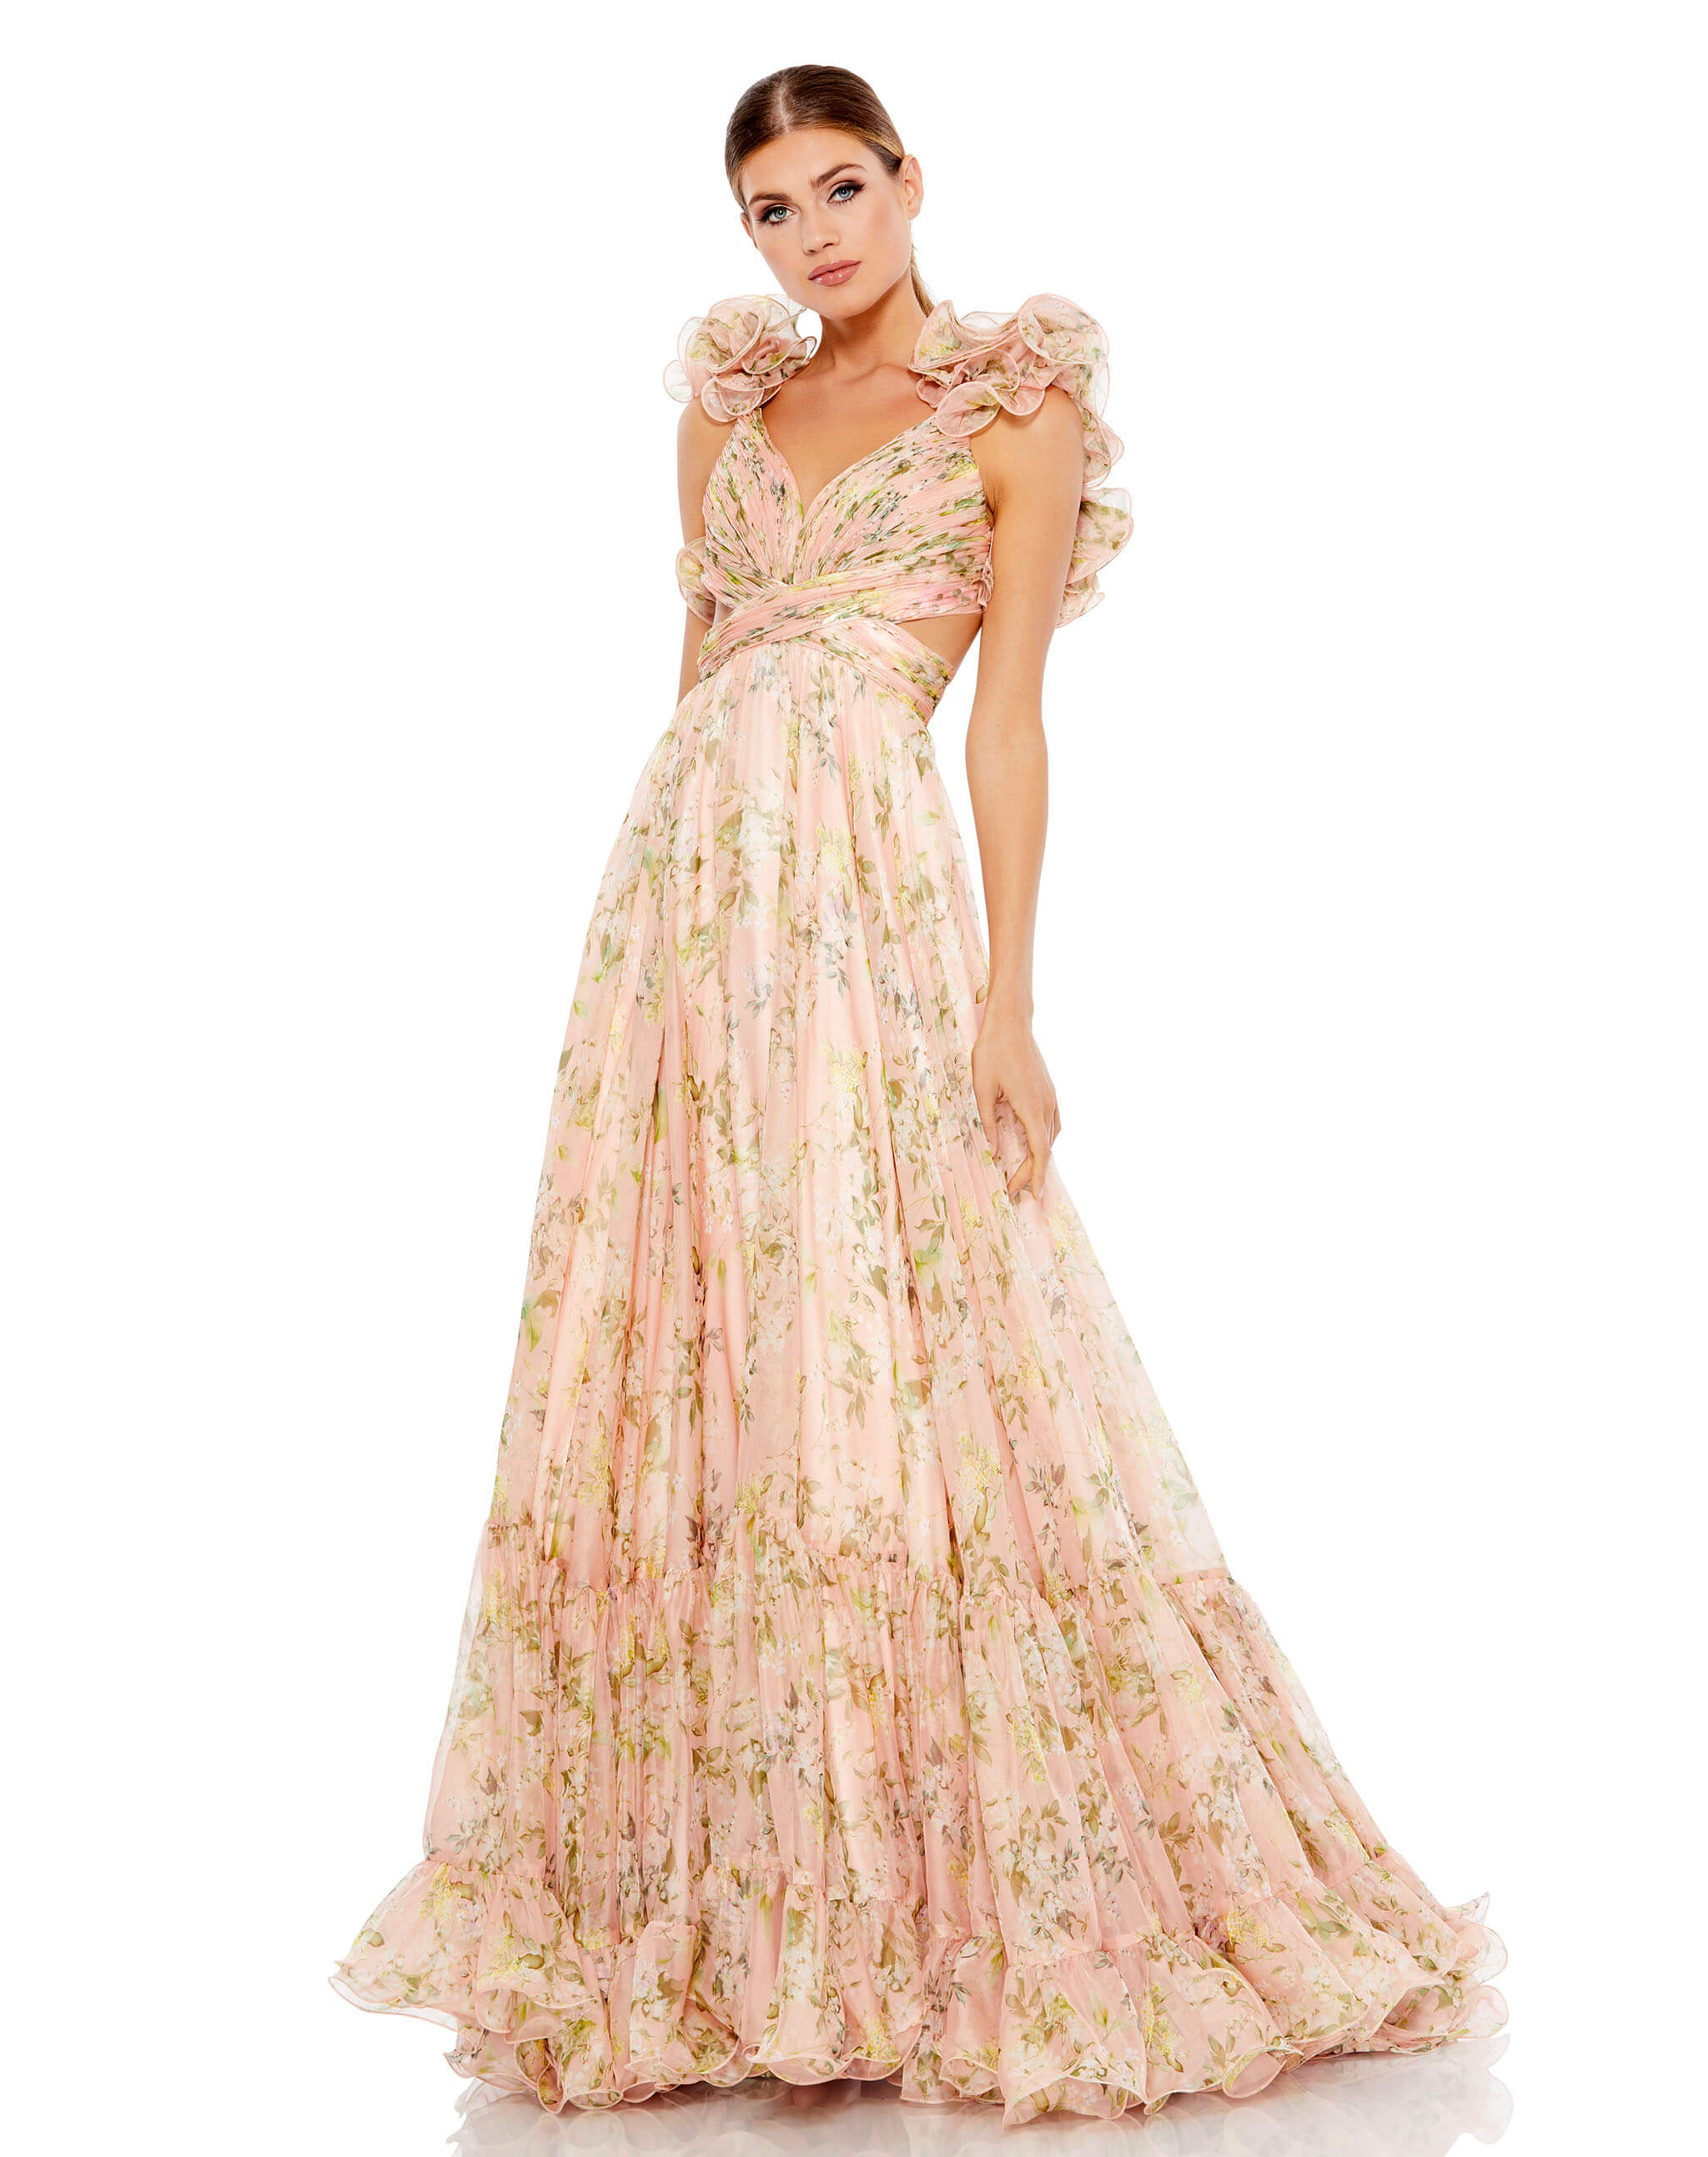 Gorgeous chiffon maxi dress with cut-out sides and back, pleated bodice, and a sexy lace-up open back. Dramatic ruffles accent the shoulders, and a flowy tiered skirt completes the look.